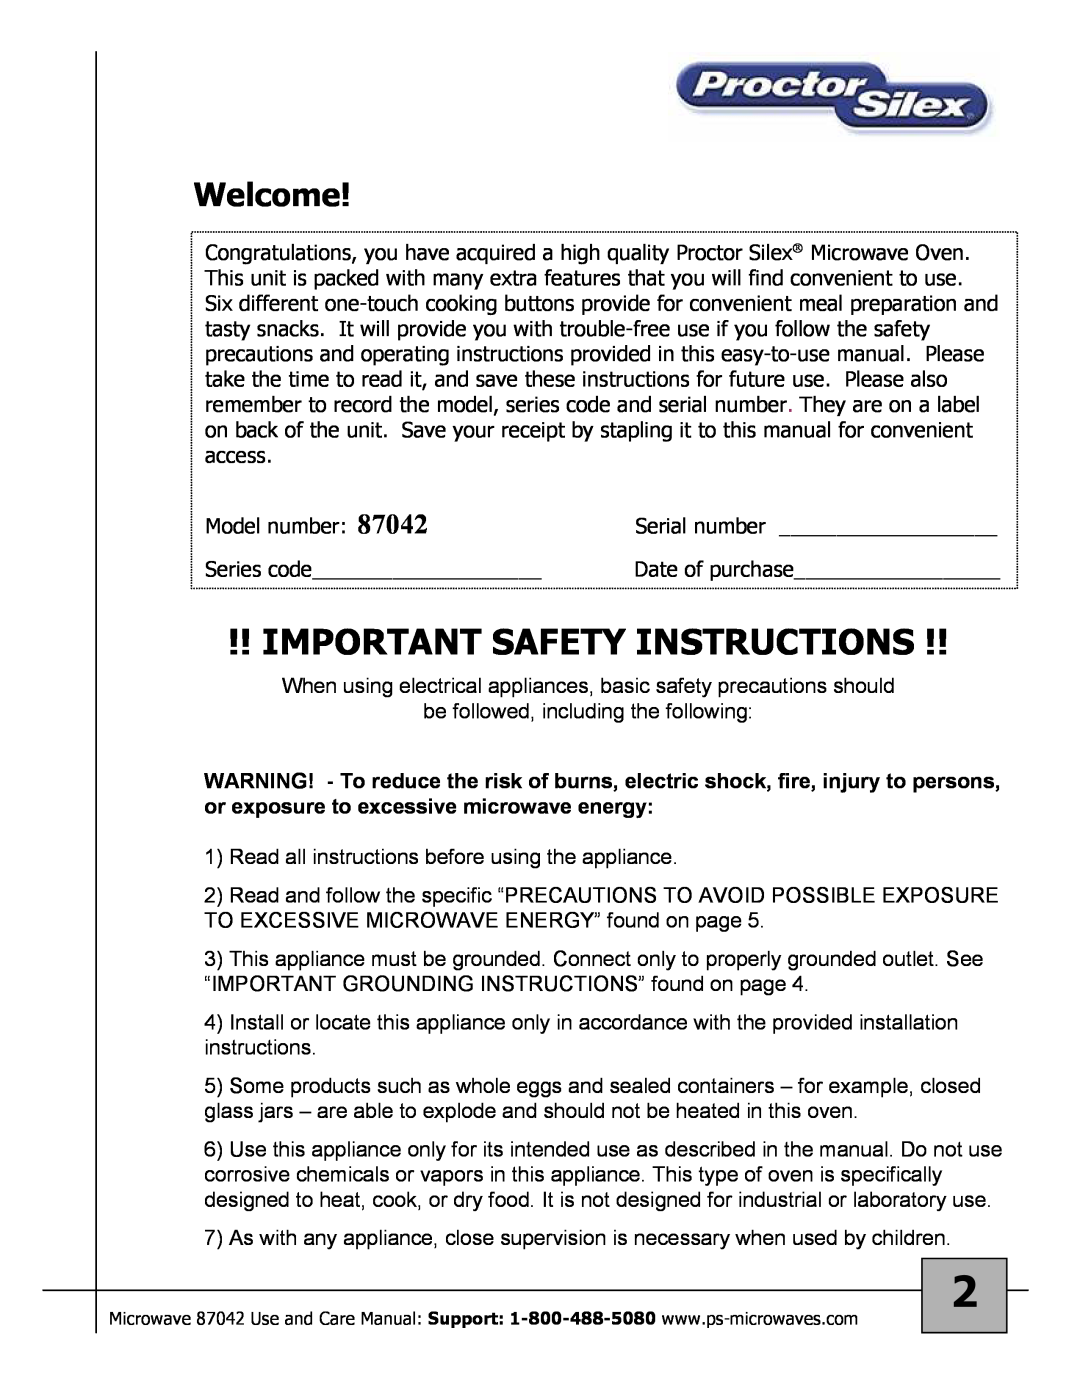 Proctor-Silex 87027 owner manual Important Safety Instructions, Welcome 